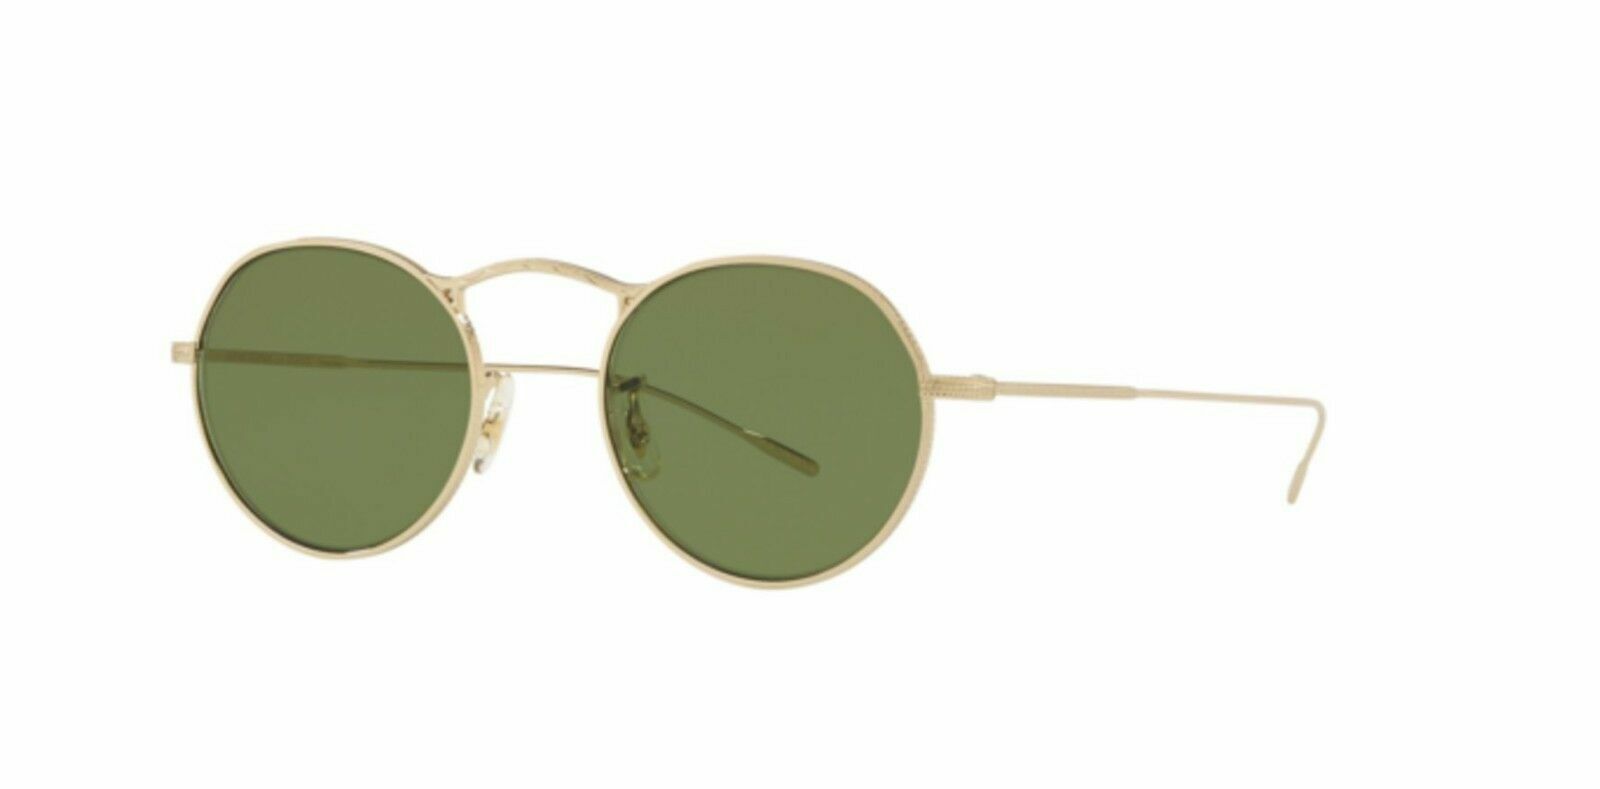 NEW OLIVER PEOPLES OV 1220S M-4 30TH 503552 SOFT GOLD SUNGLASSES.